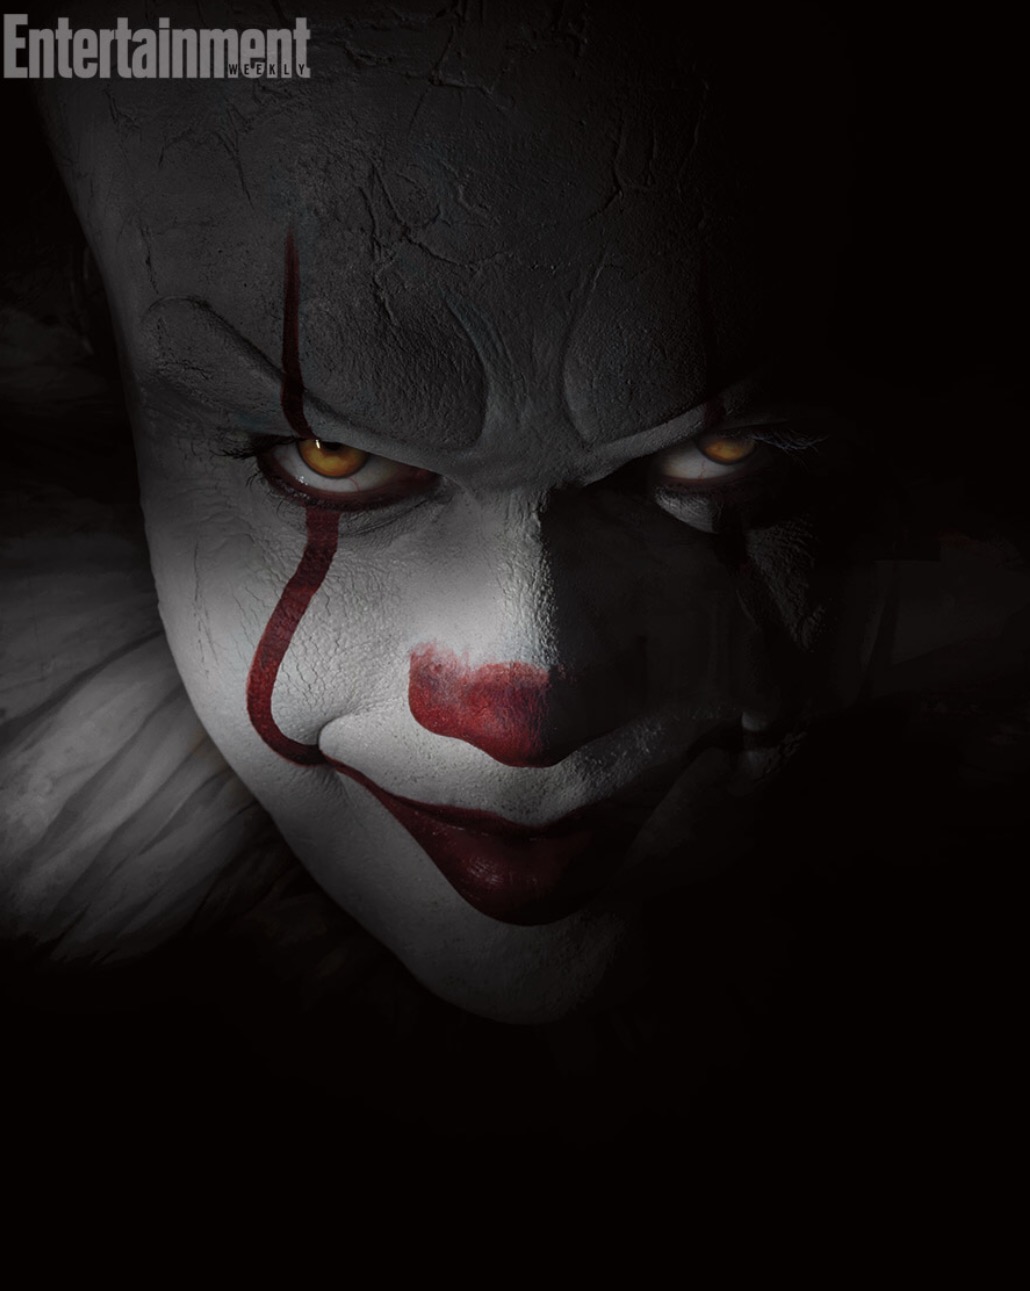 clown-pennywise-ca-grippesou-it-stephen-king